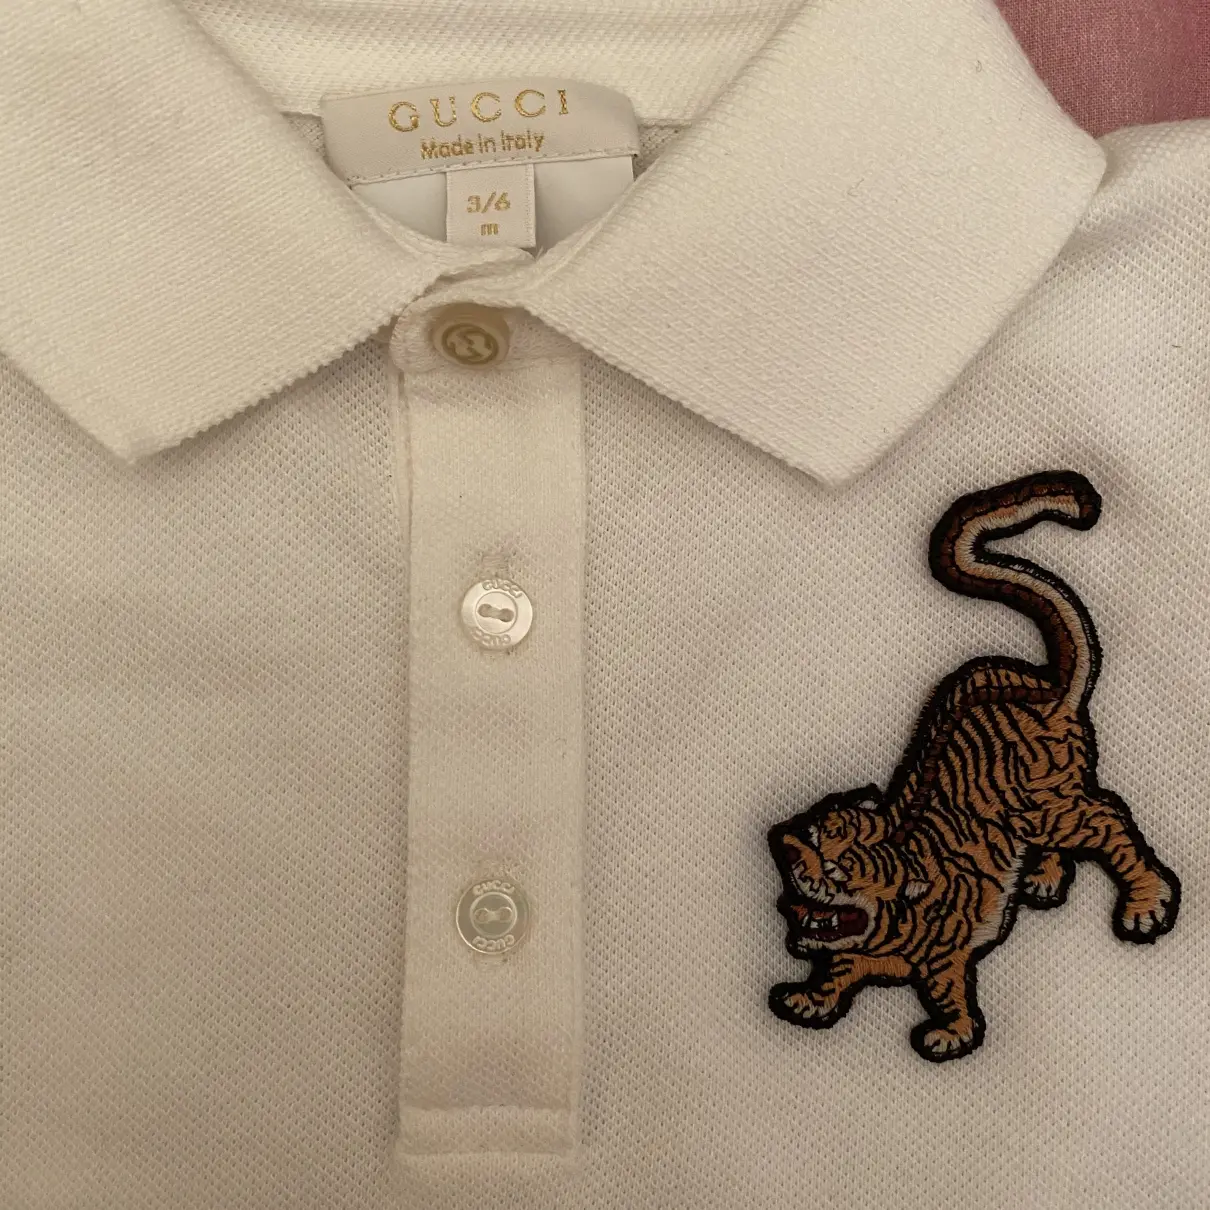 Buy Gucci Outfit online